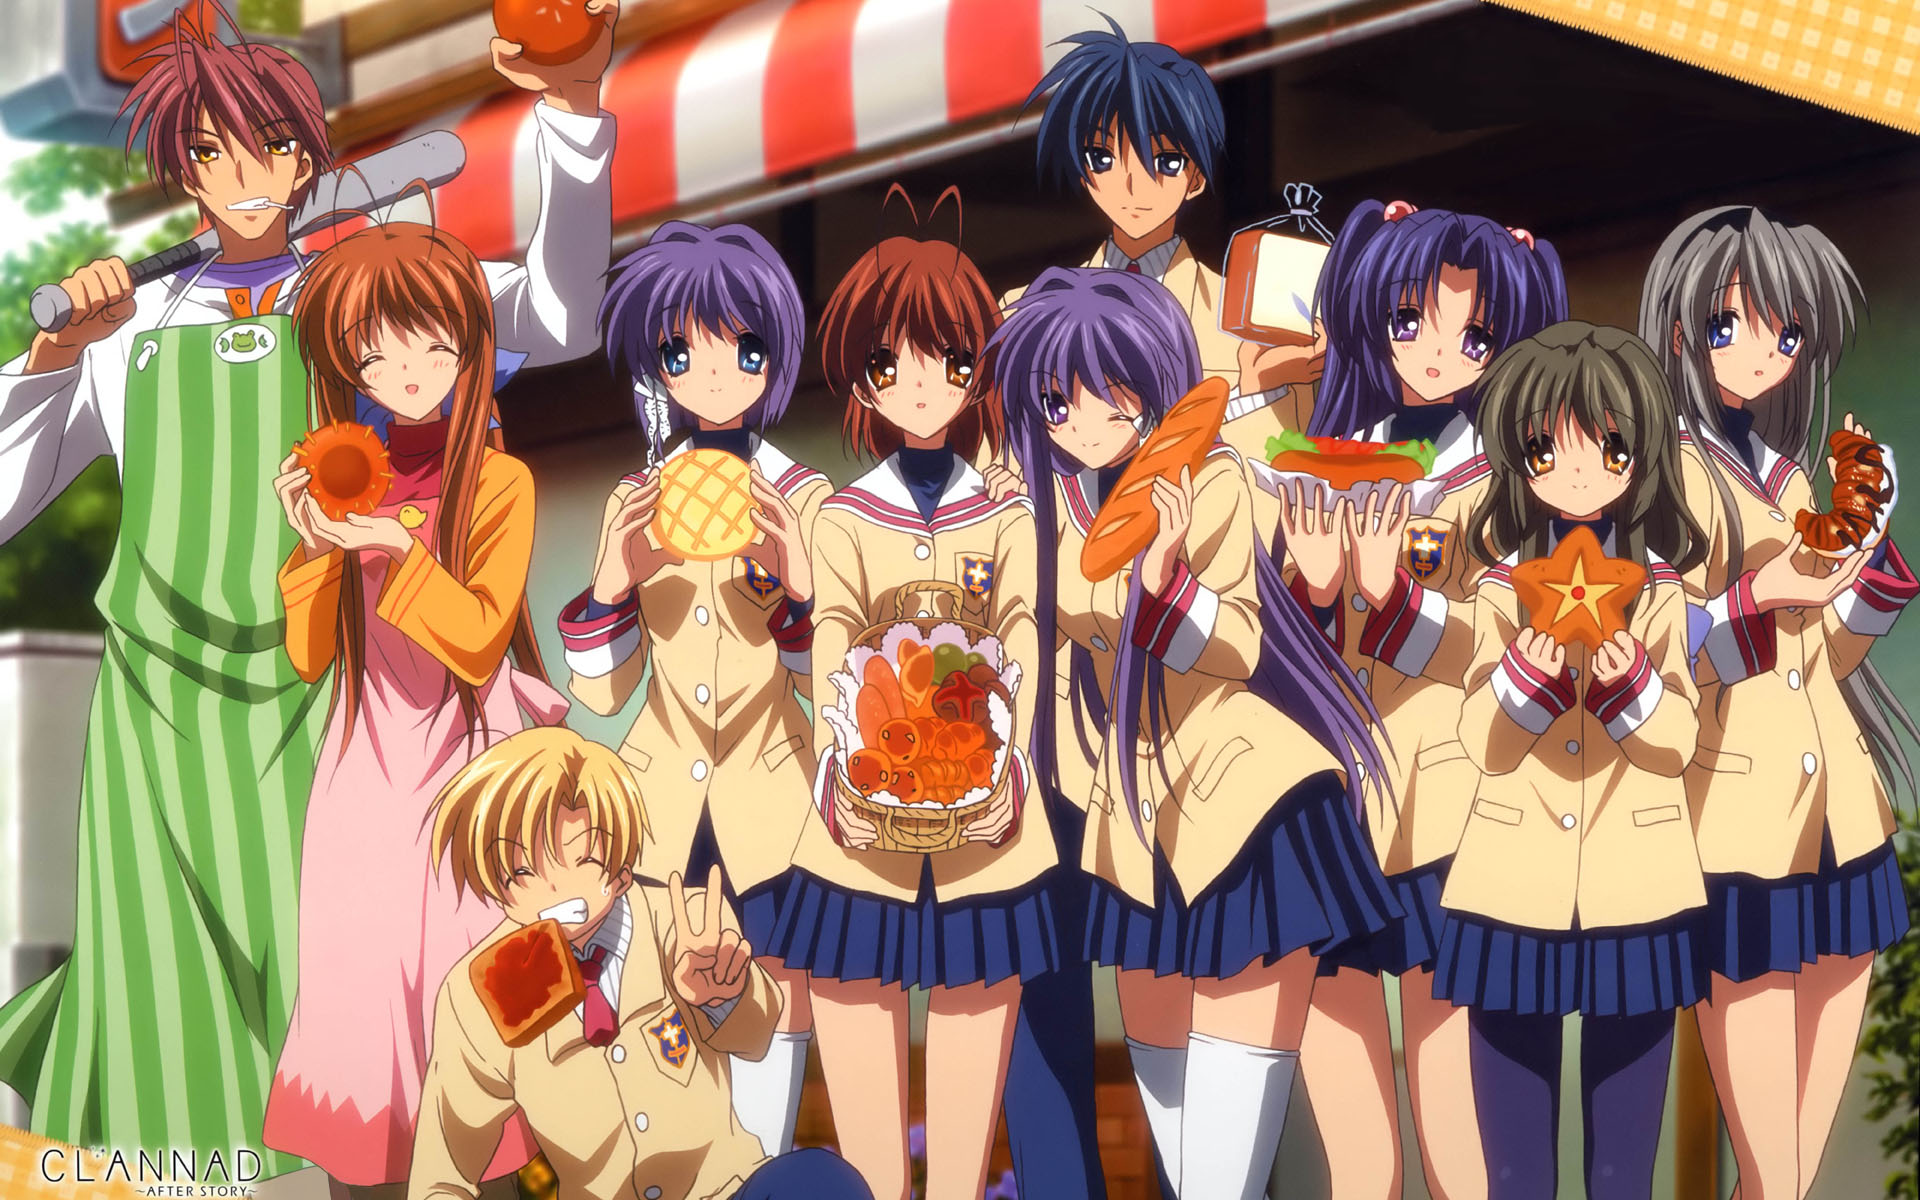 Clannad characters gathered together smiling.